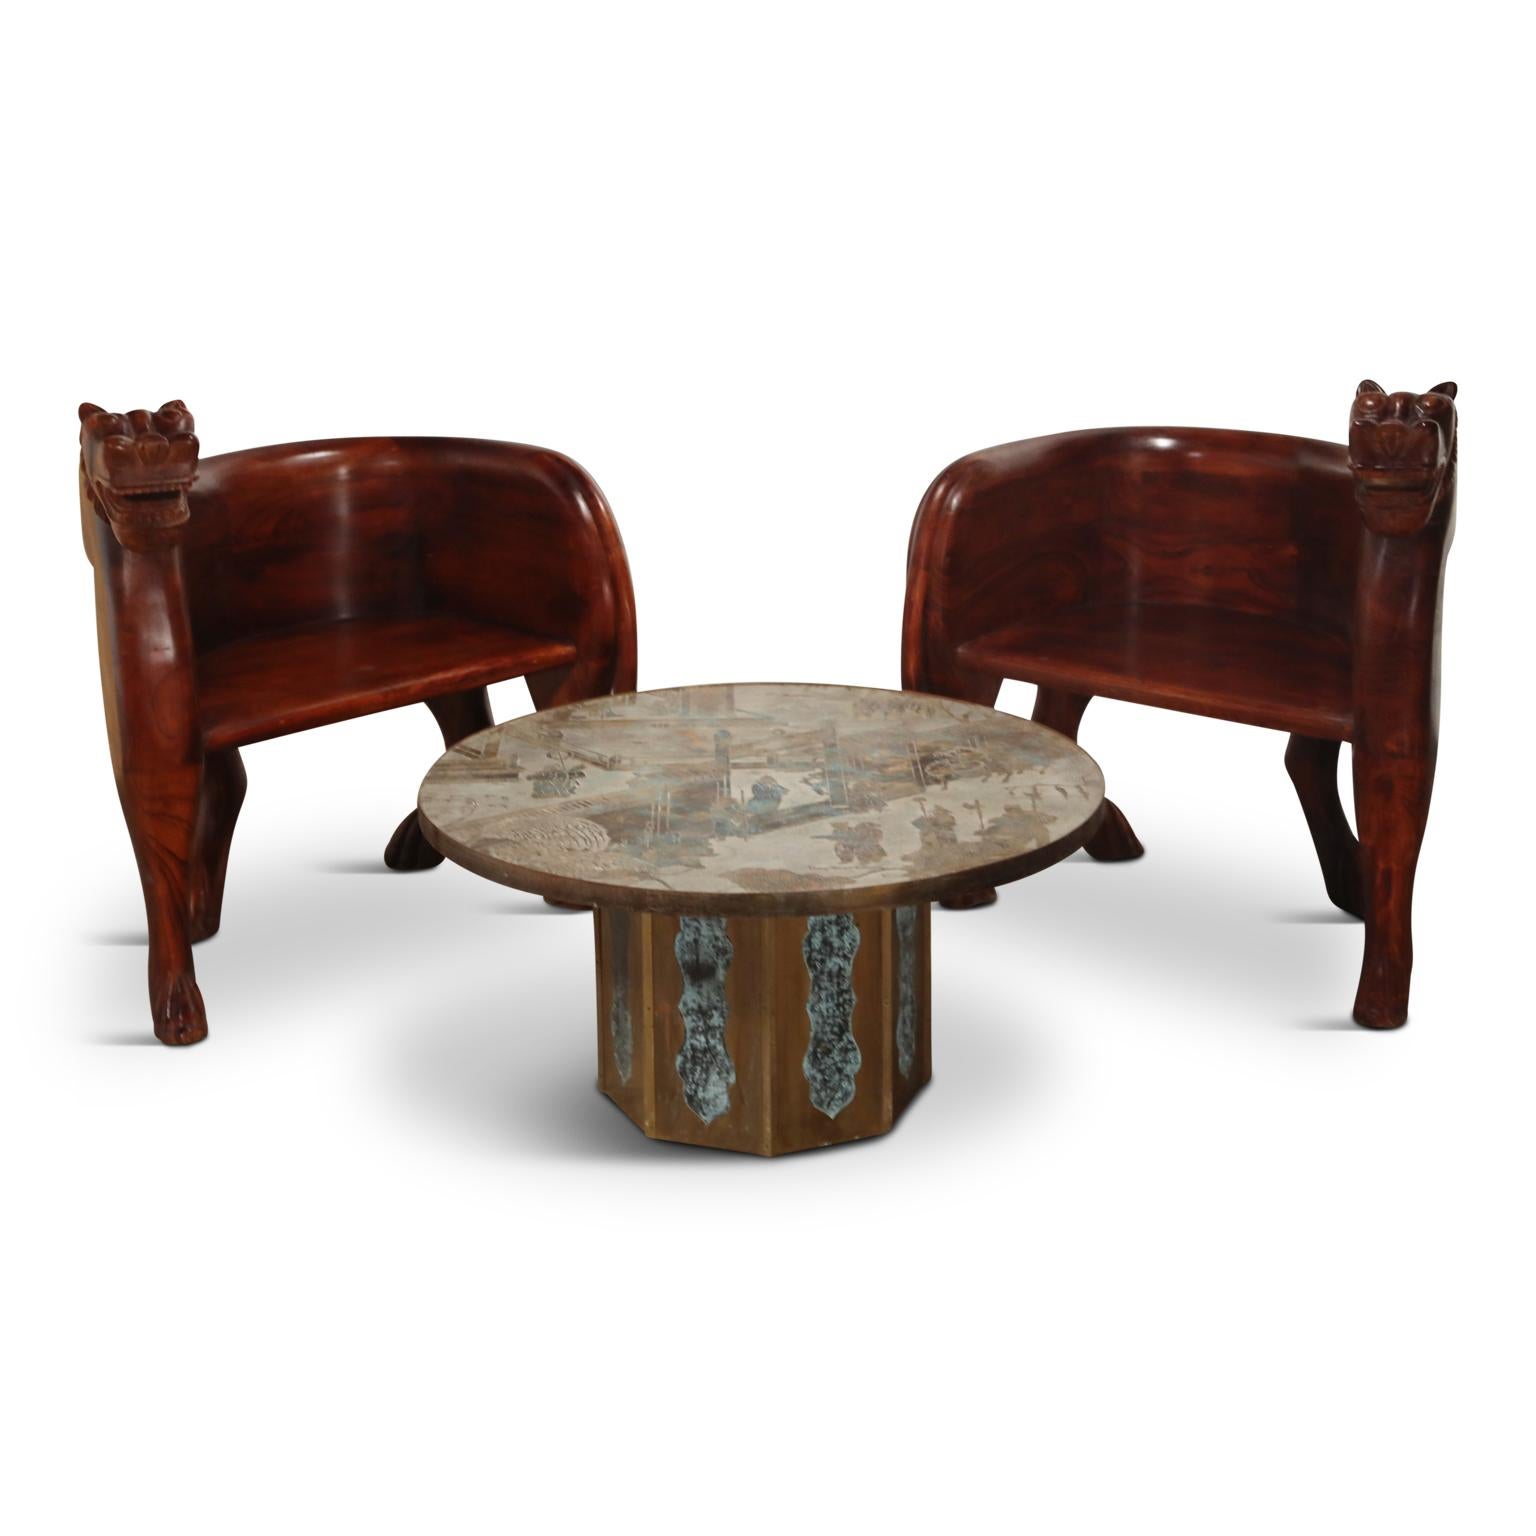 This spectacular pair of hand carved teak lioness club chairs are front-cover-magazine-worthy and can add a bit of the unexpected to any style of room. The color is a deep reddish brown that more closely resembles rosewood or Brazilian Jacaranda